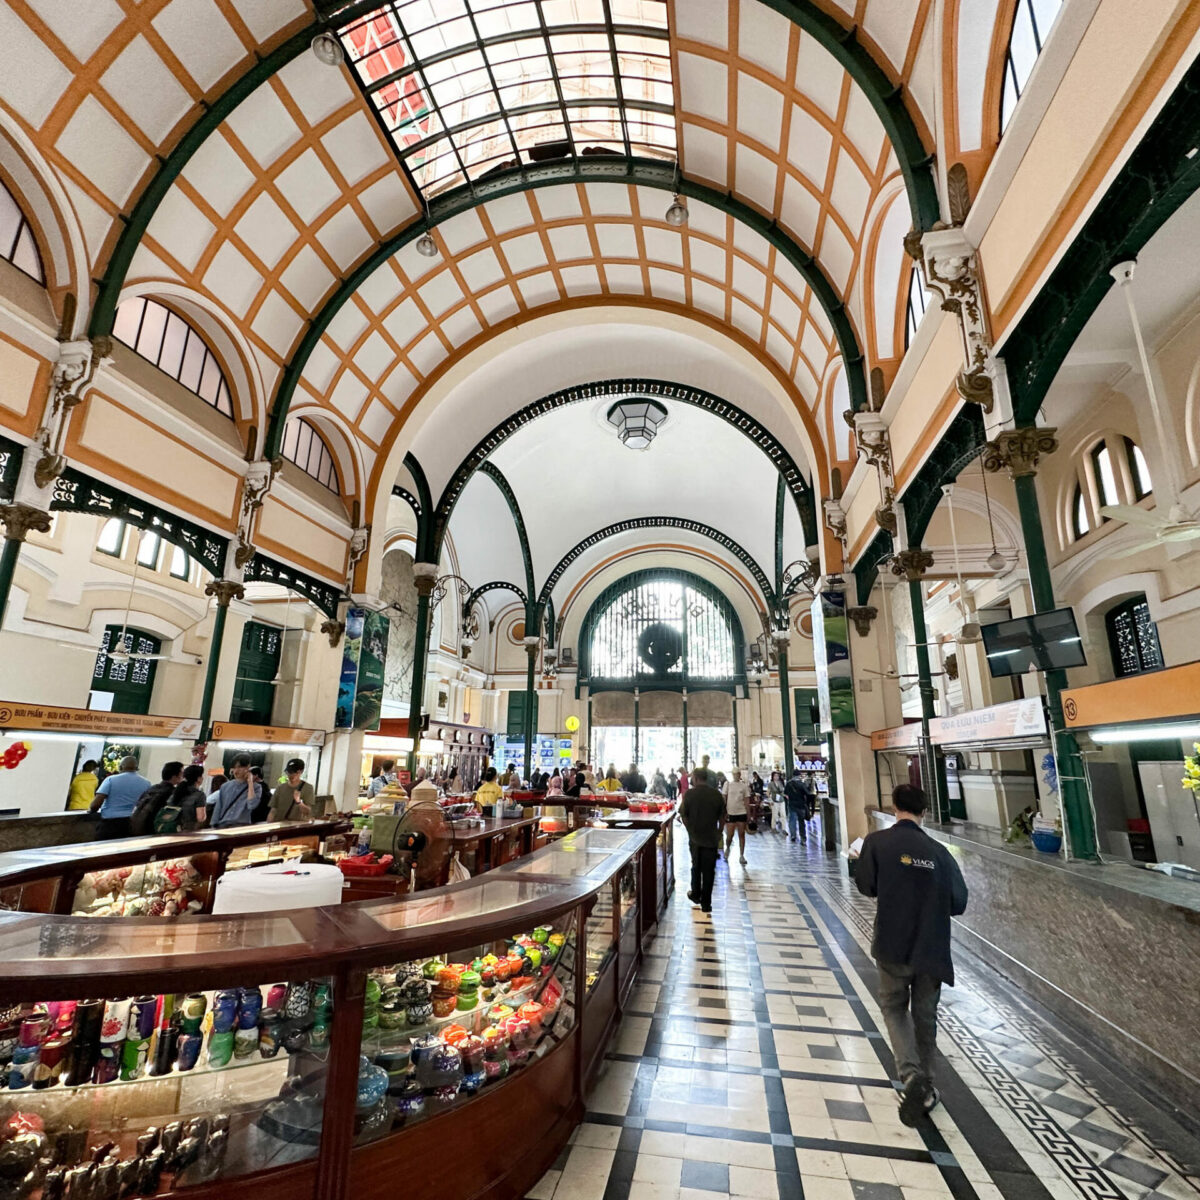 From its intricate architecture to its grand interior - Saigon Central post Office